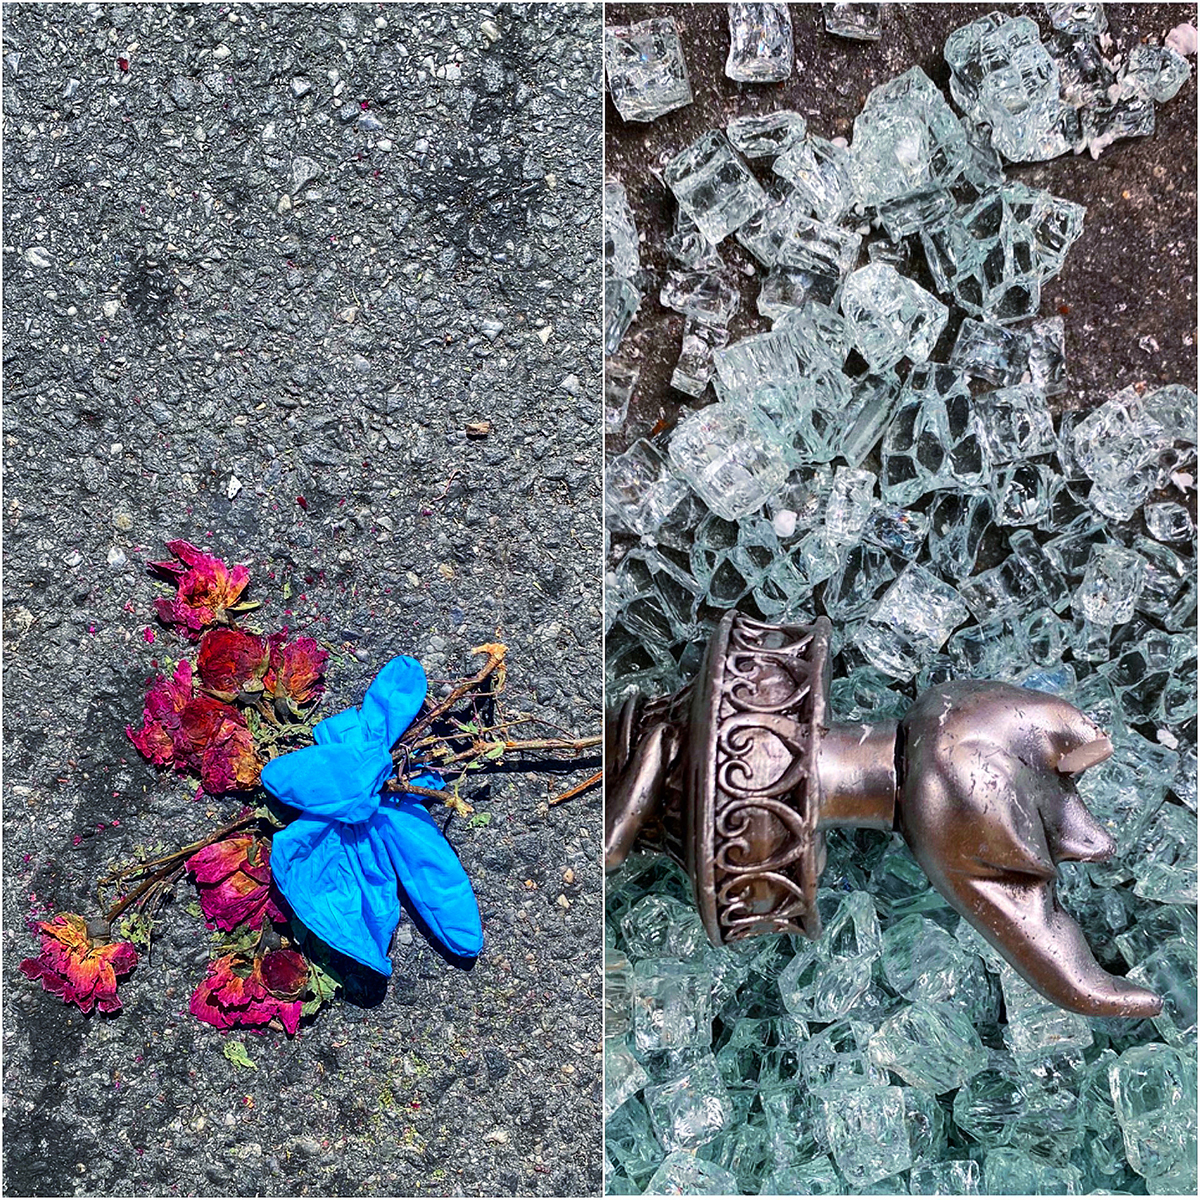 (Diptych, L-R) Gloves tied to dried roses, and a broken liberty torch amongst shattered glass, during heavy protesting against police brutality in New York, June of 2020. Yana Paskova/NPR